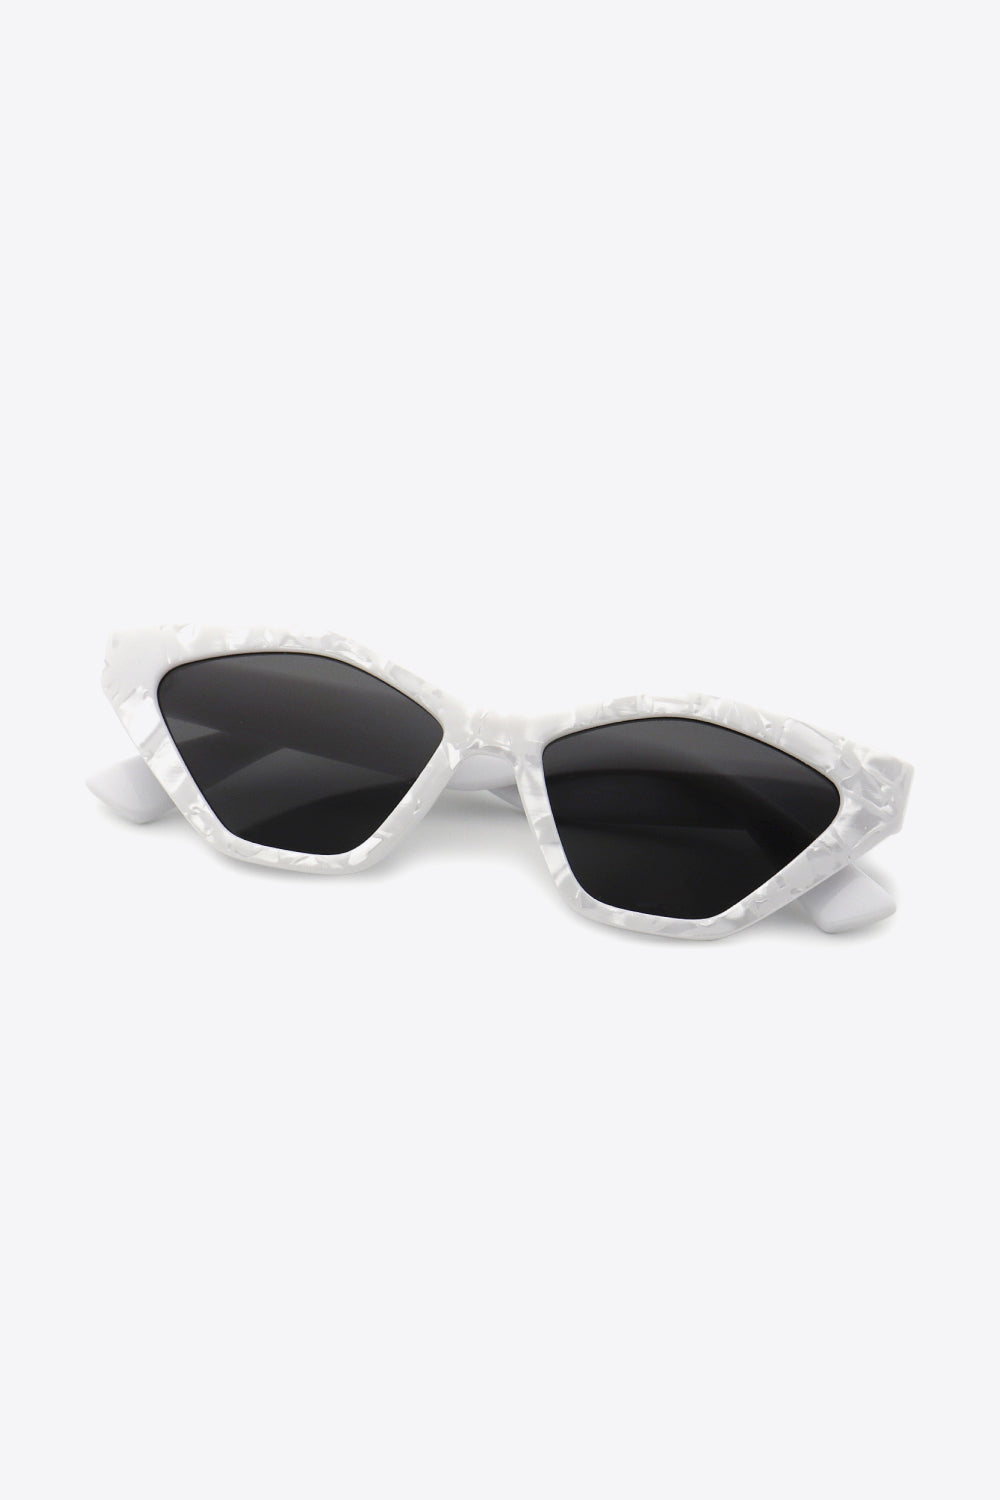 Cat Eye Polycarbonate Sunglasses Print on any thing USA/STOD clothes